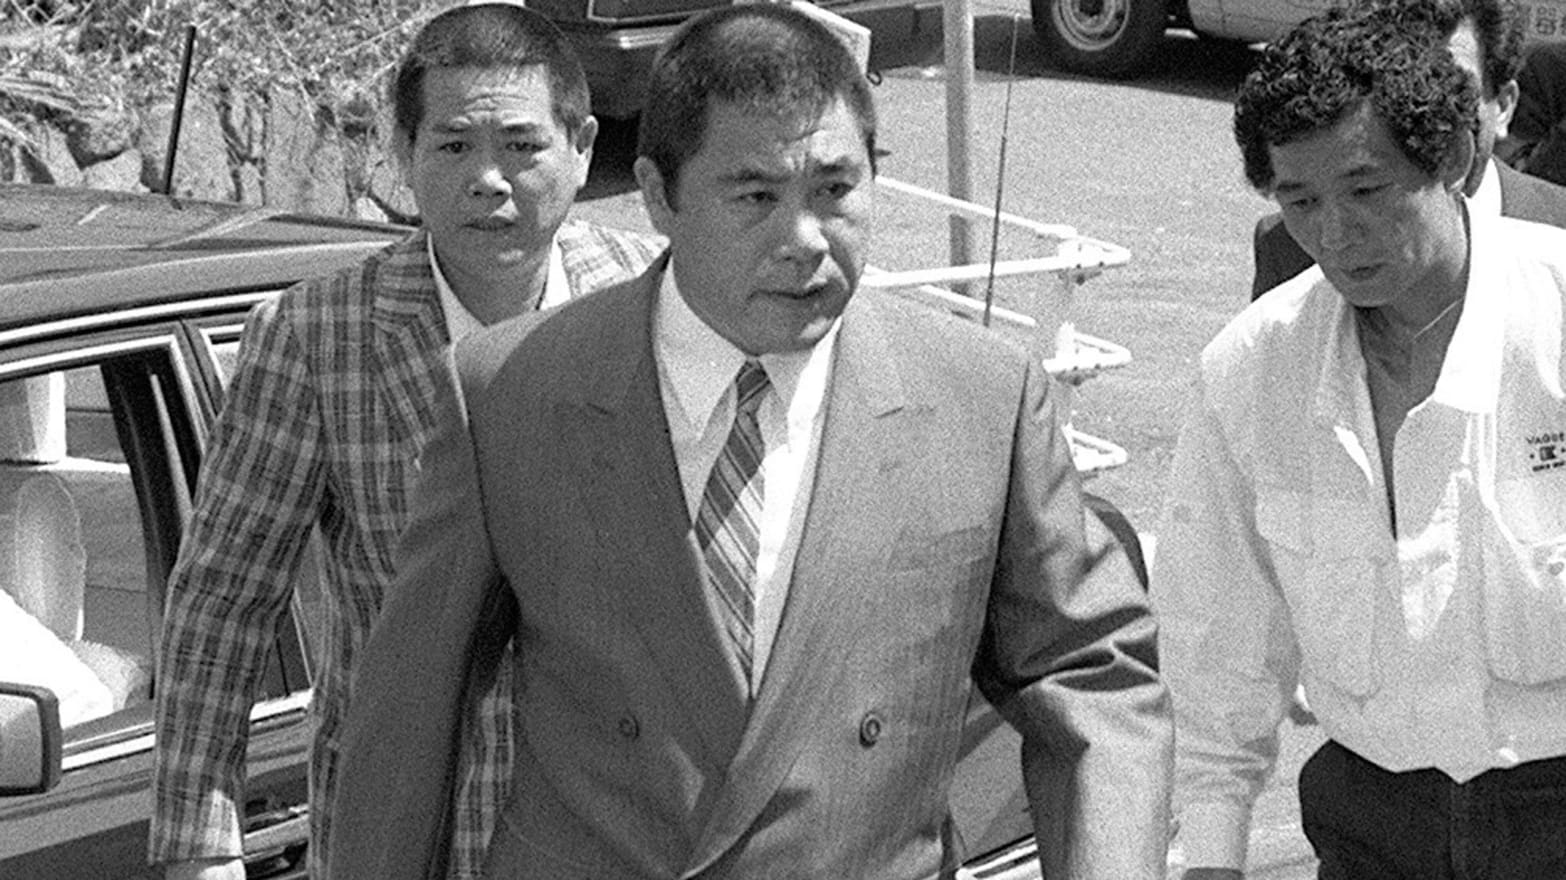 Boss Force A Japaness Employ Wife Porn Vedio - The Death and Legacy of Yakuza Boss â€œMr. Gorillaâ€